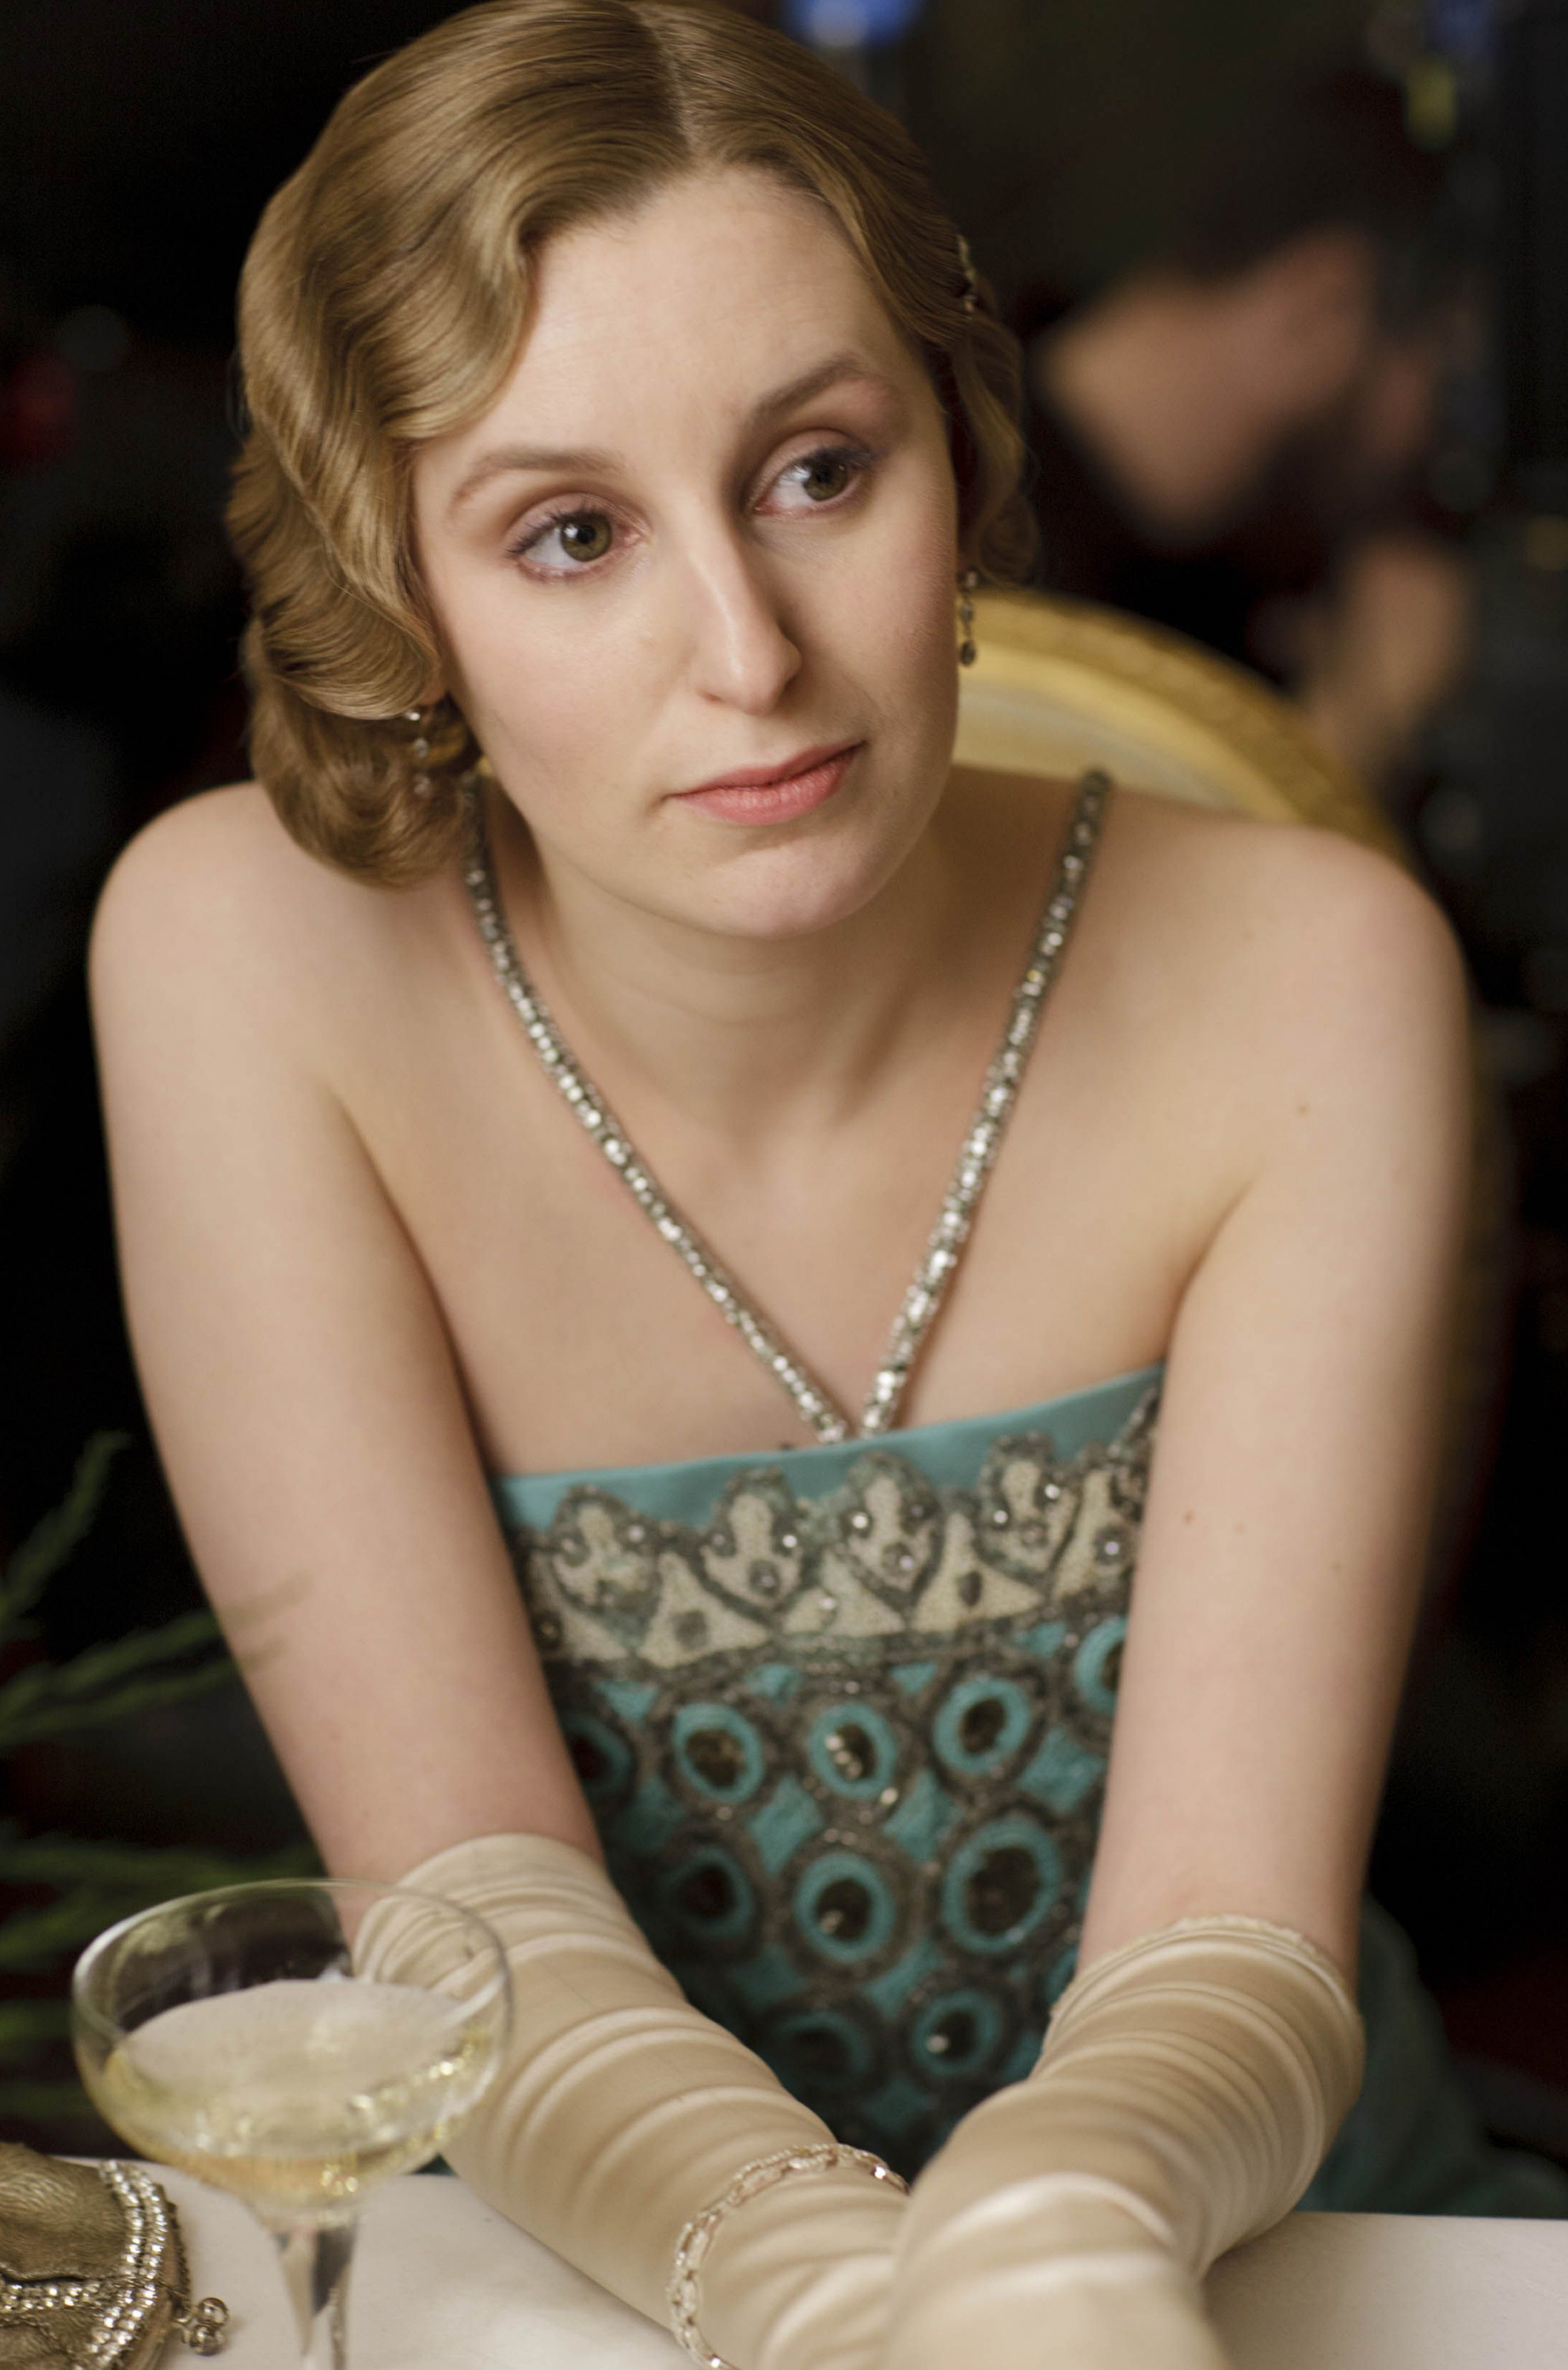 <p>Laura Carmichael, as Lady Edith, wore a striking blue, cream and metallic beaded halter-style dress with cream satin gloves on season 4 of "Downton Abbey."</p>